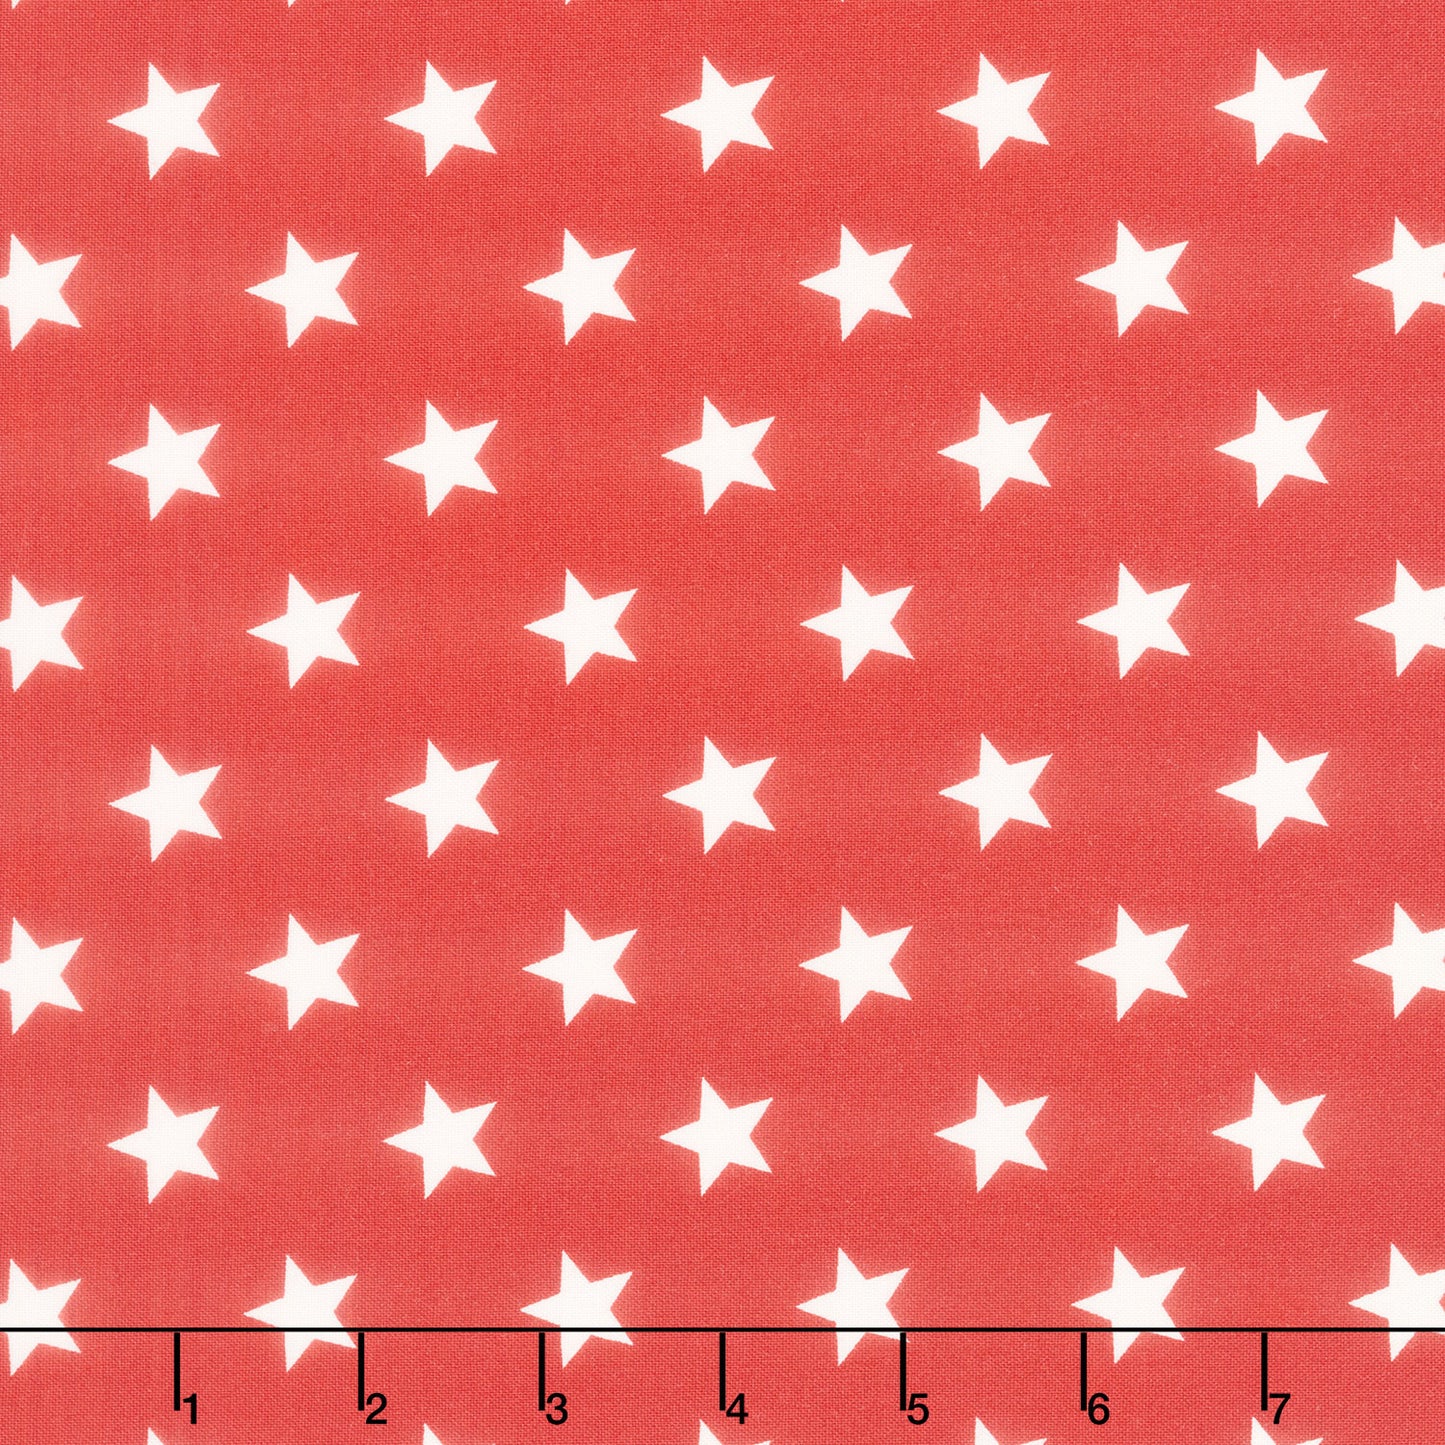 Monthly Placemat Coordinate - Stars Red Yardage Primary Image